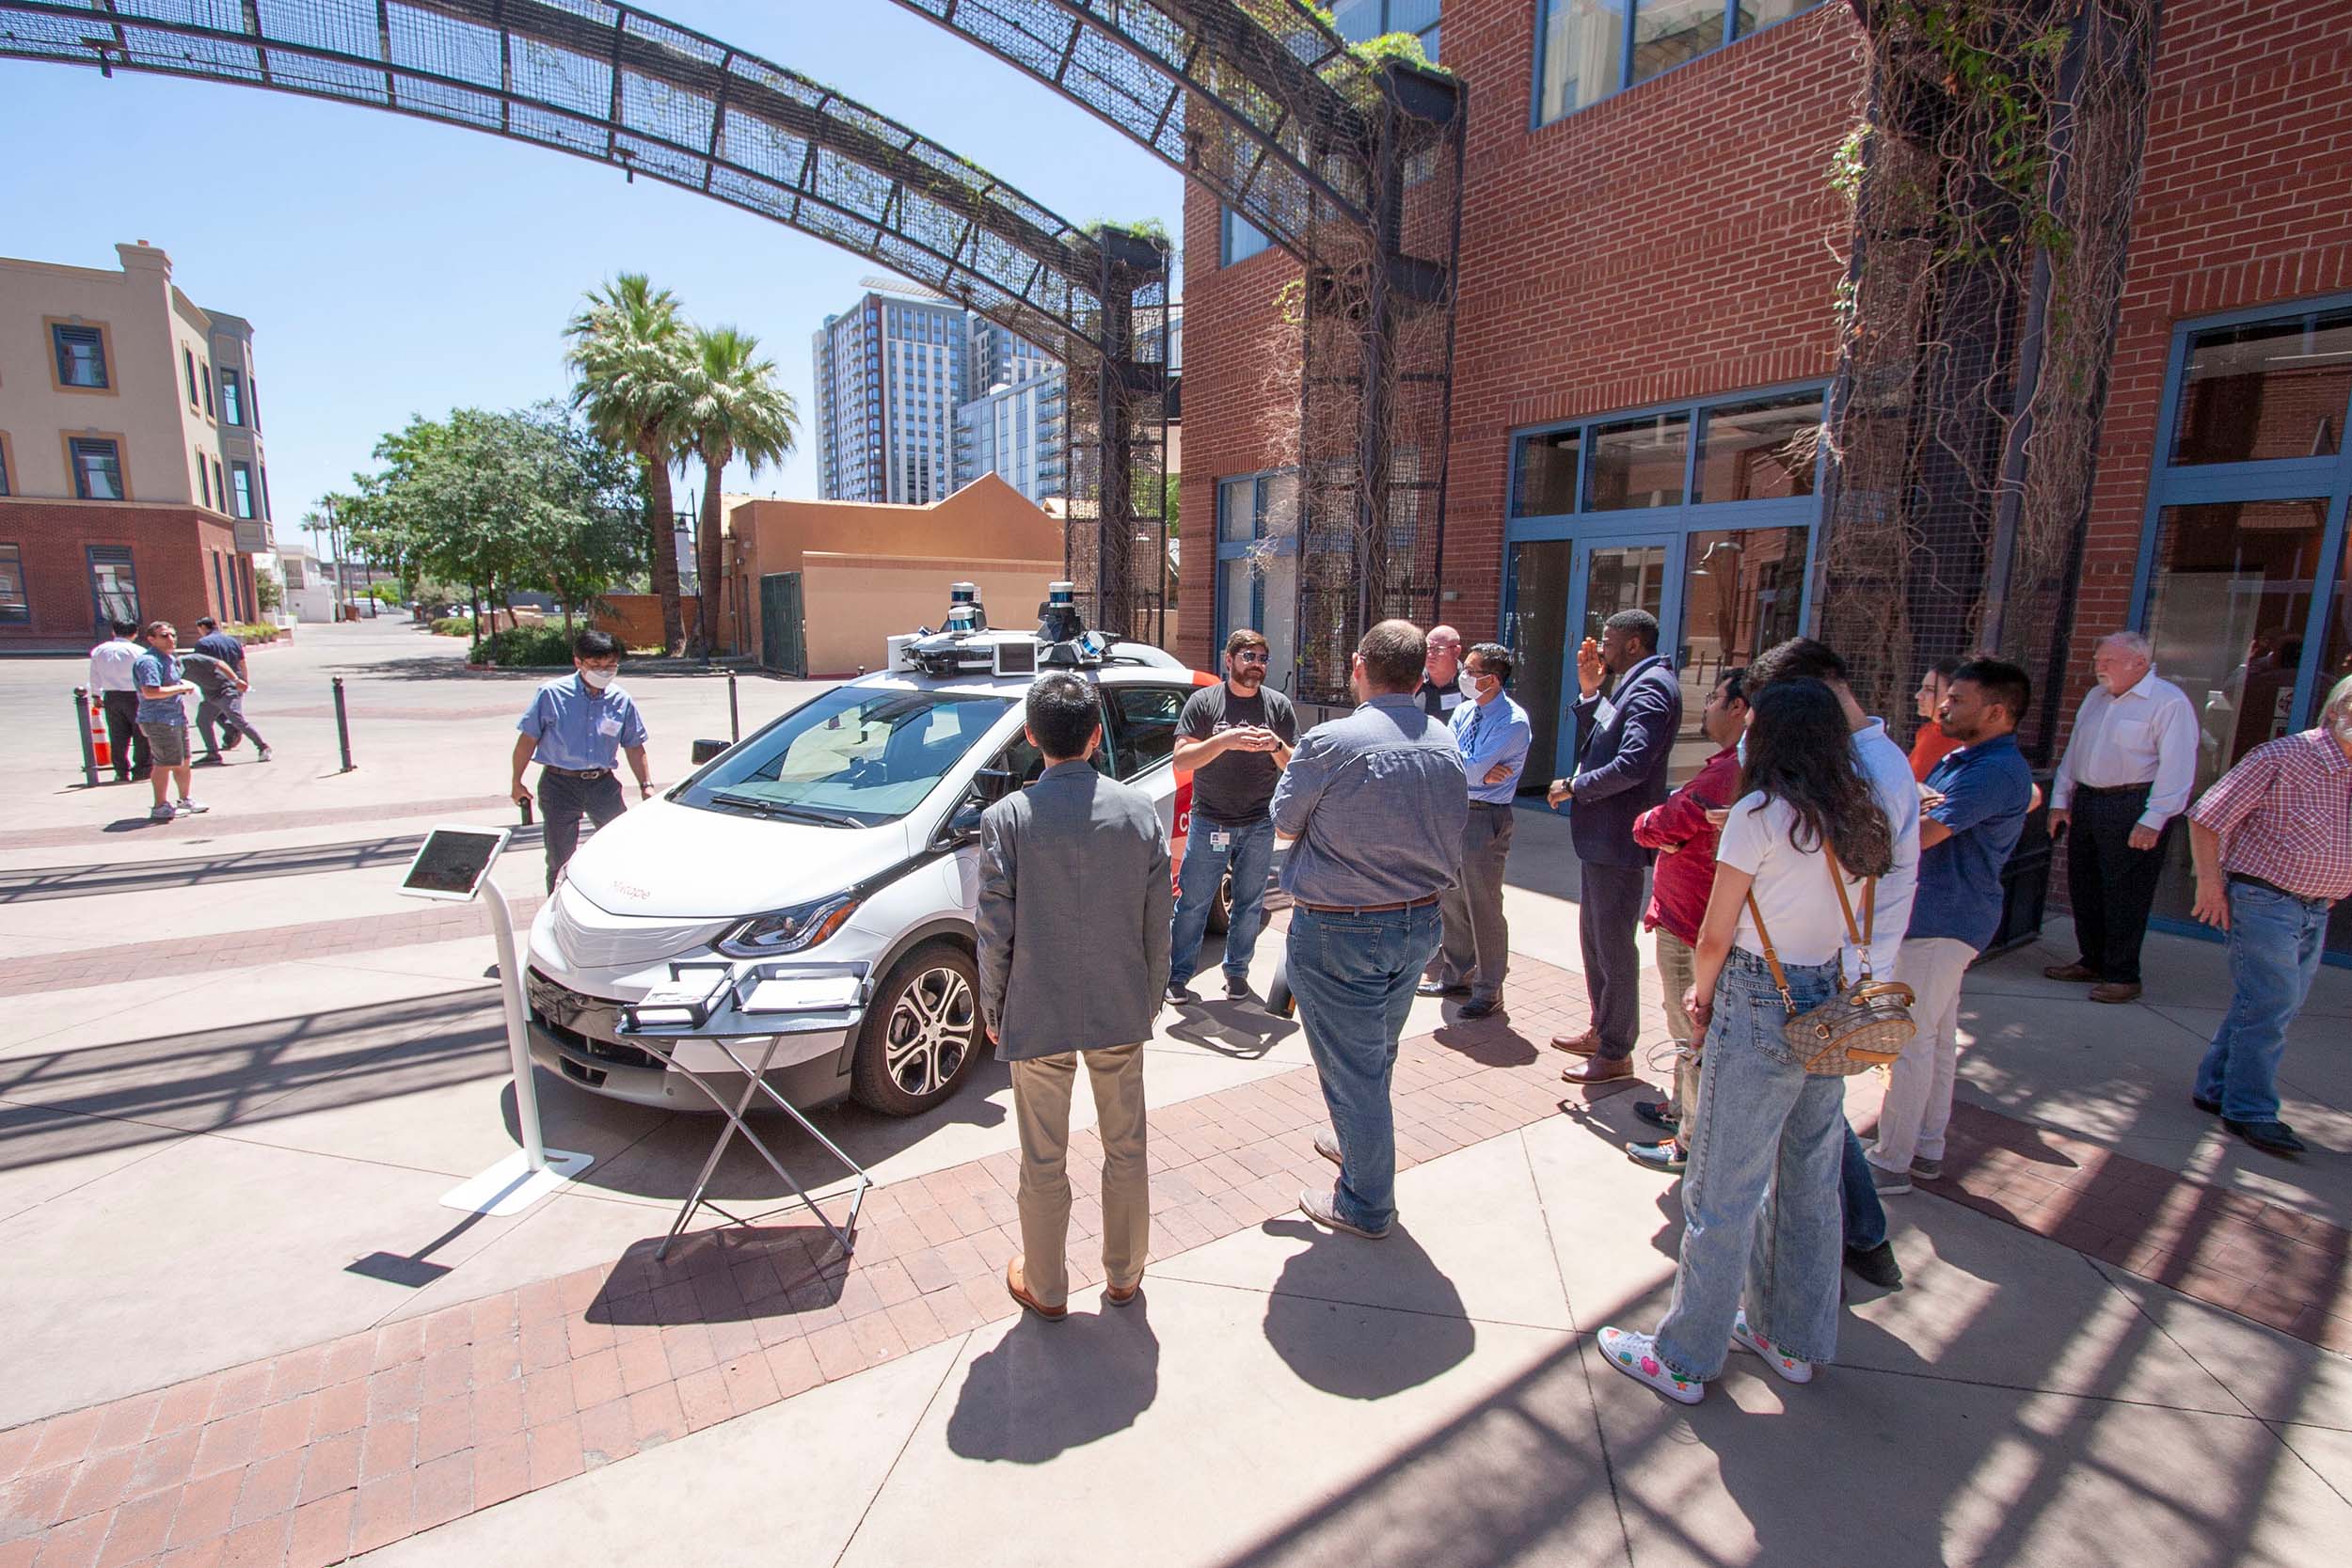 A crowd of people around an electric autonomous vehicle